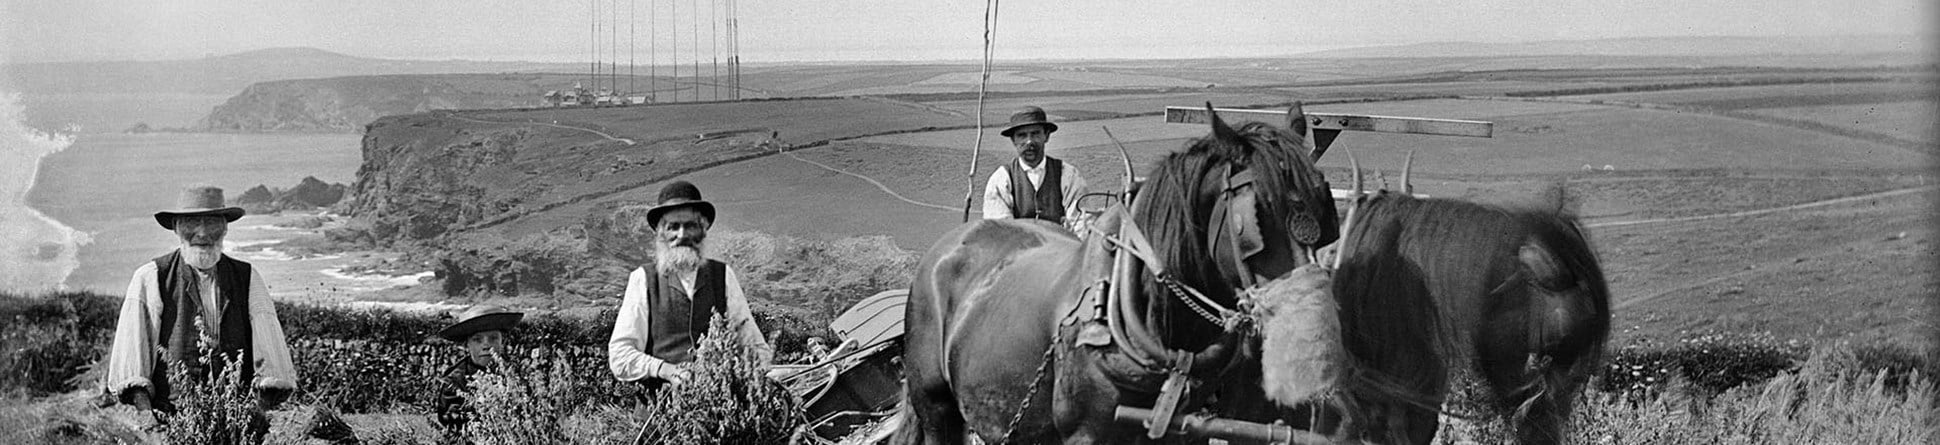 Black and white archive photograph of three farm workers and a horse drawn vehicle posing for the camera in a field, with radio masts, cliffs and coasts in the background.